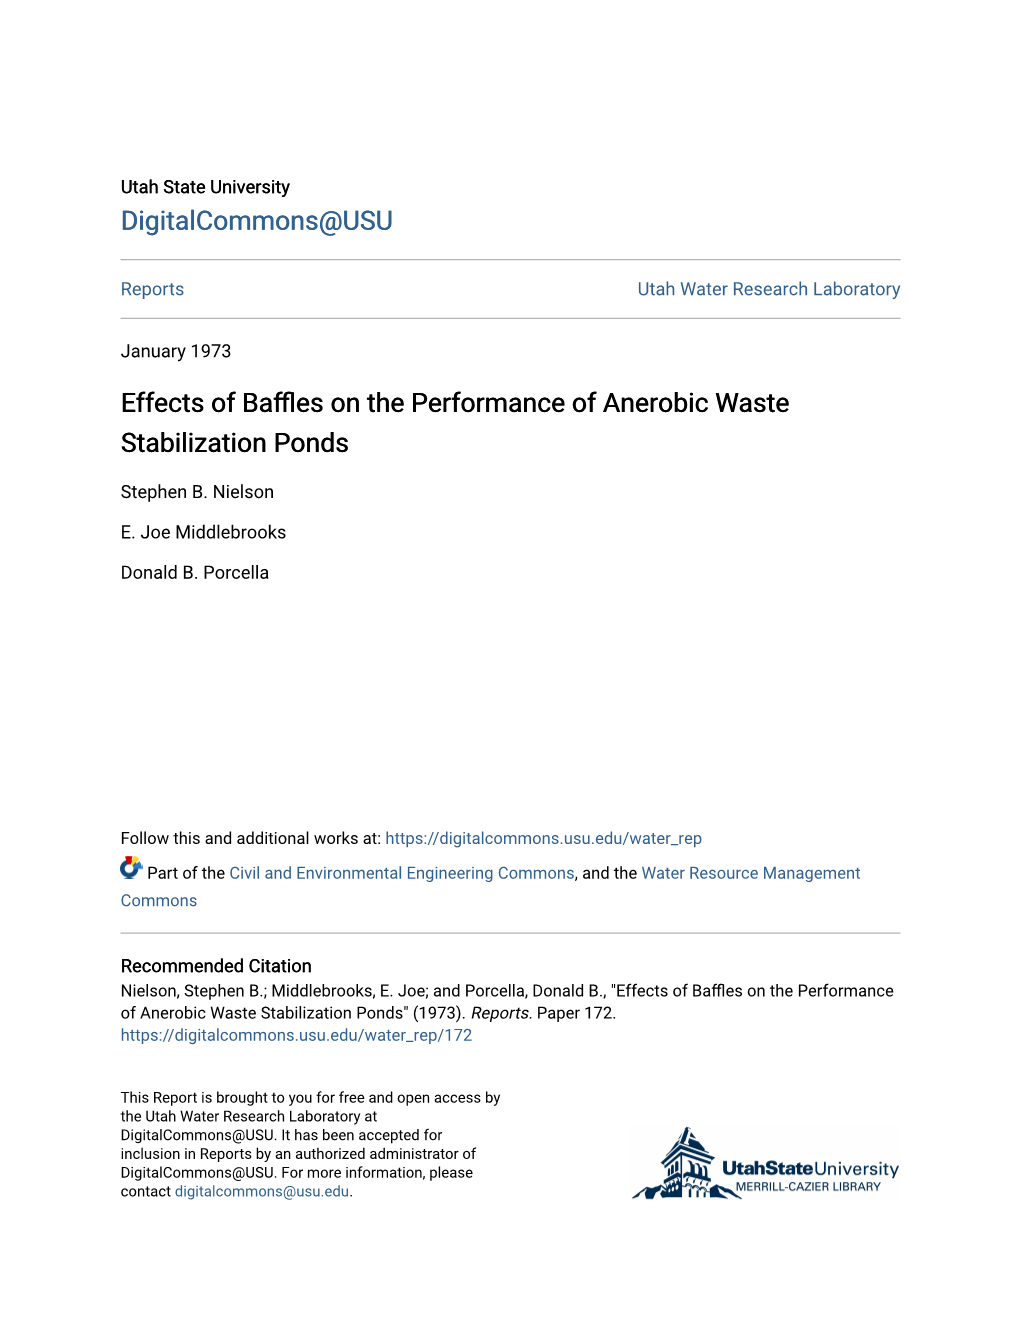 Effects of Baffles on the Performance of Anerobic Waste Stabilization Ponds